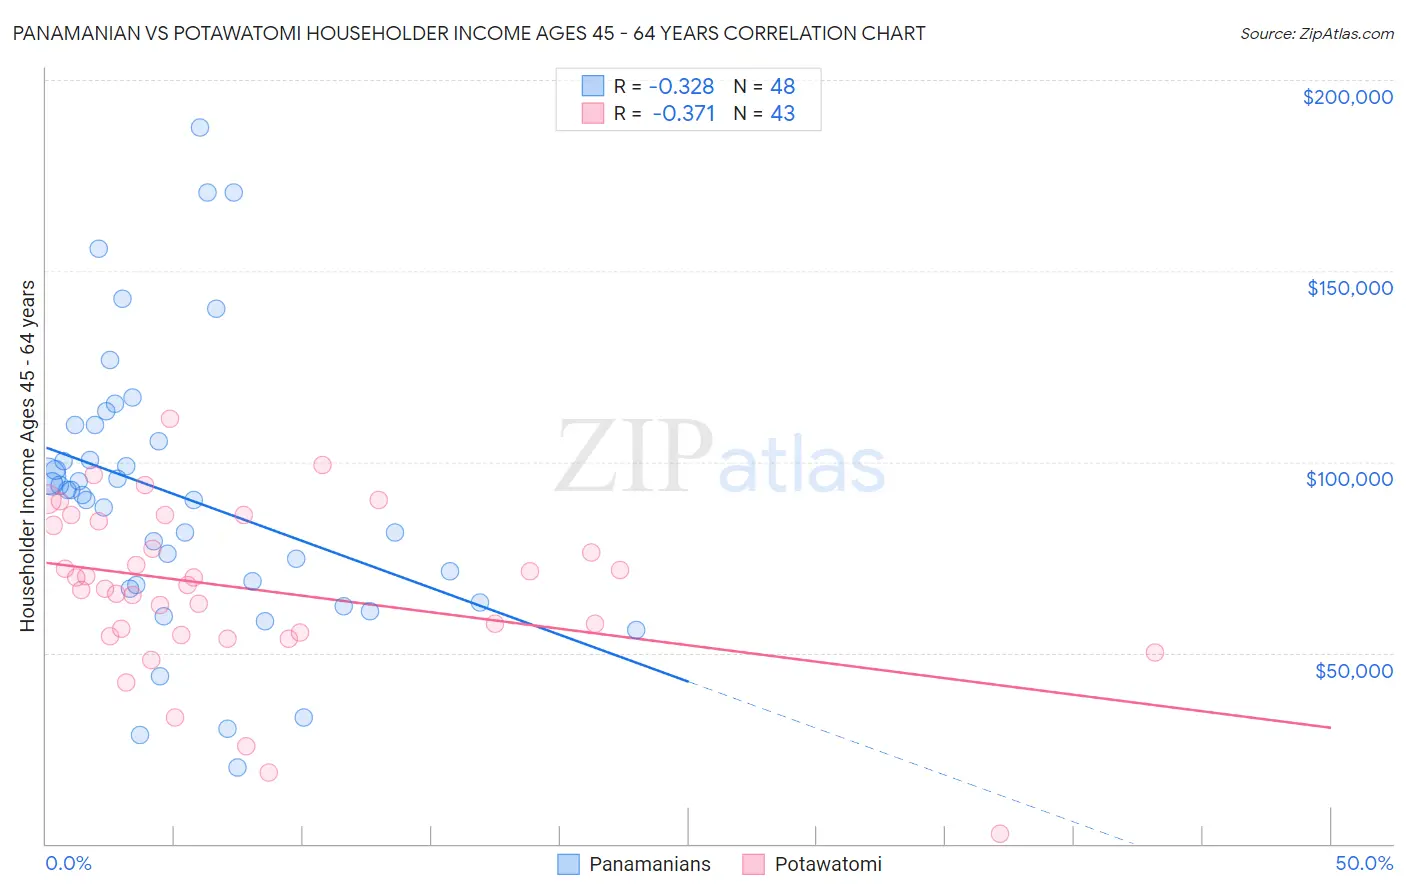 Panamanian vs Potawatomi Householder Income Ages 45 - 64 years